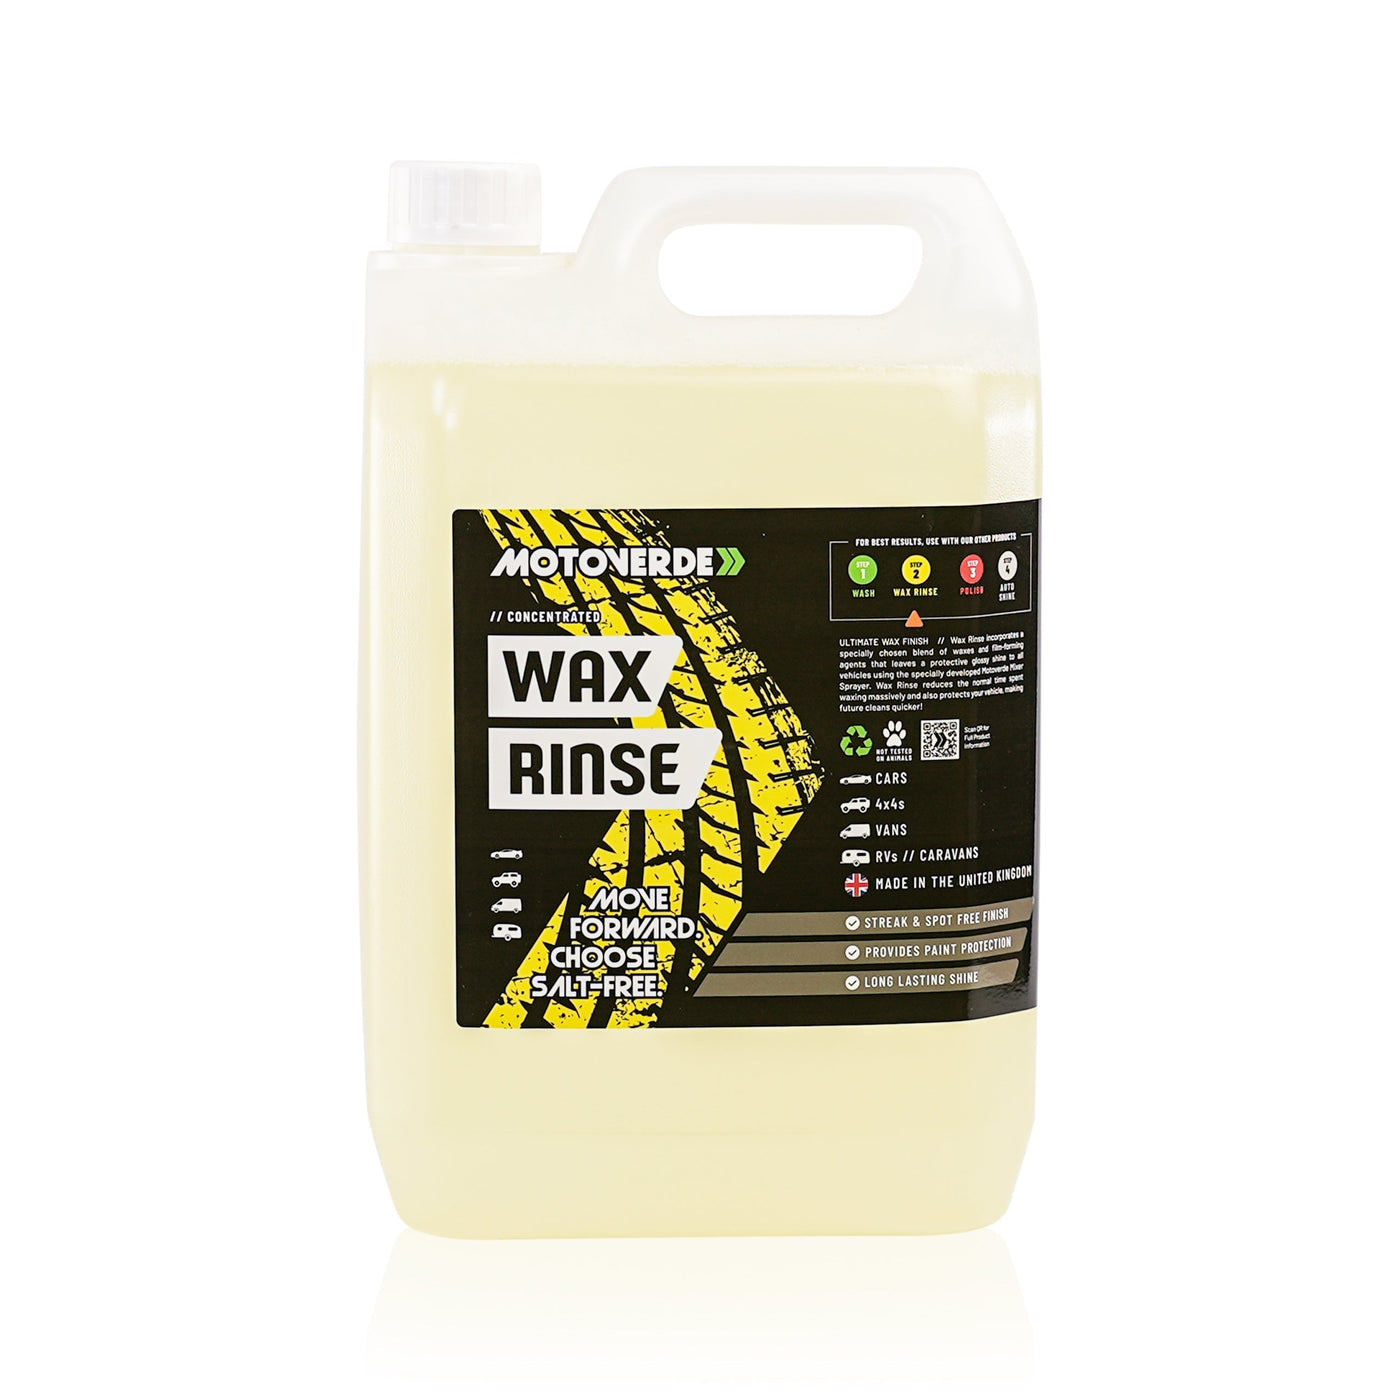 Motoverde Wax Rinse - Concentrated, 5 Litre